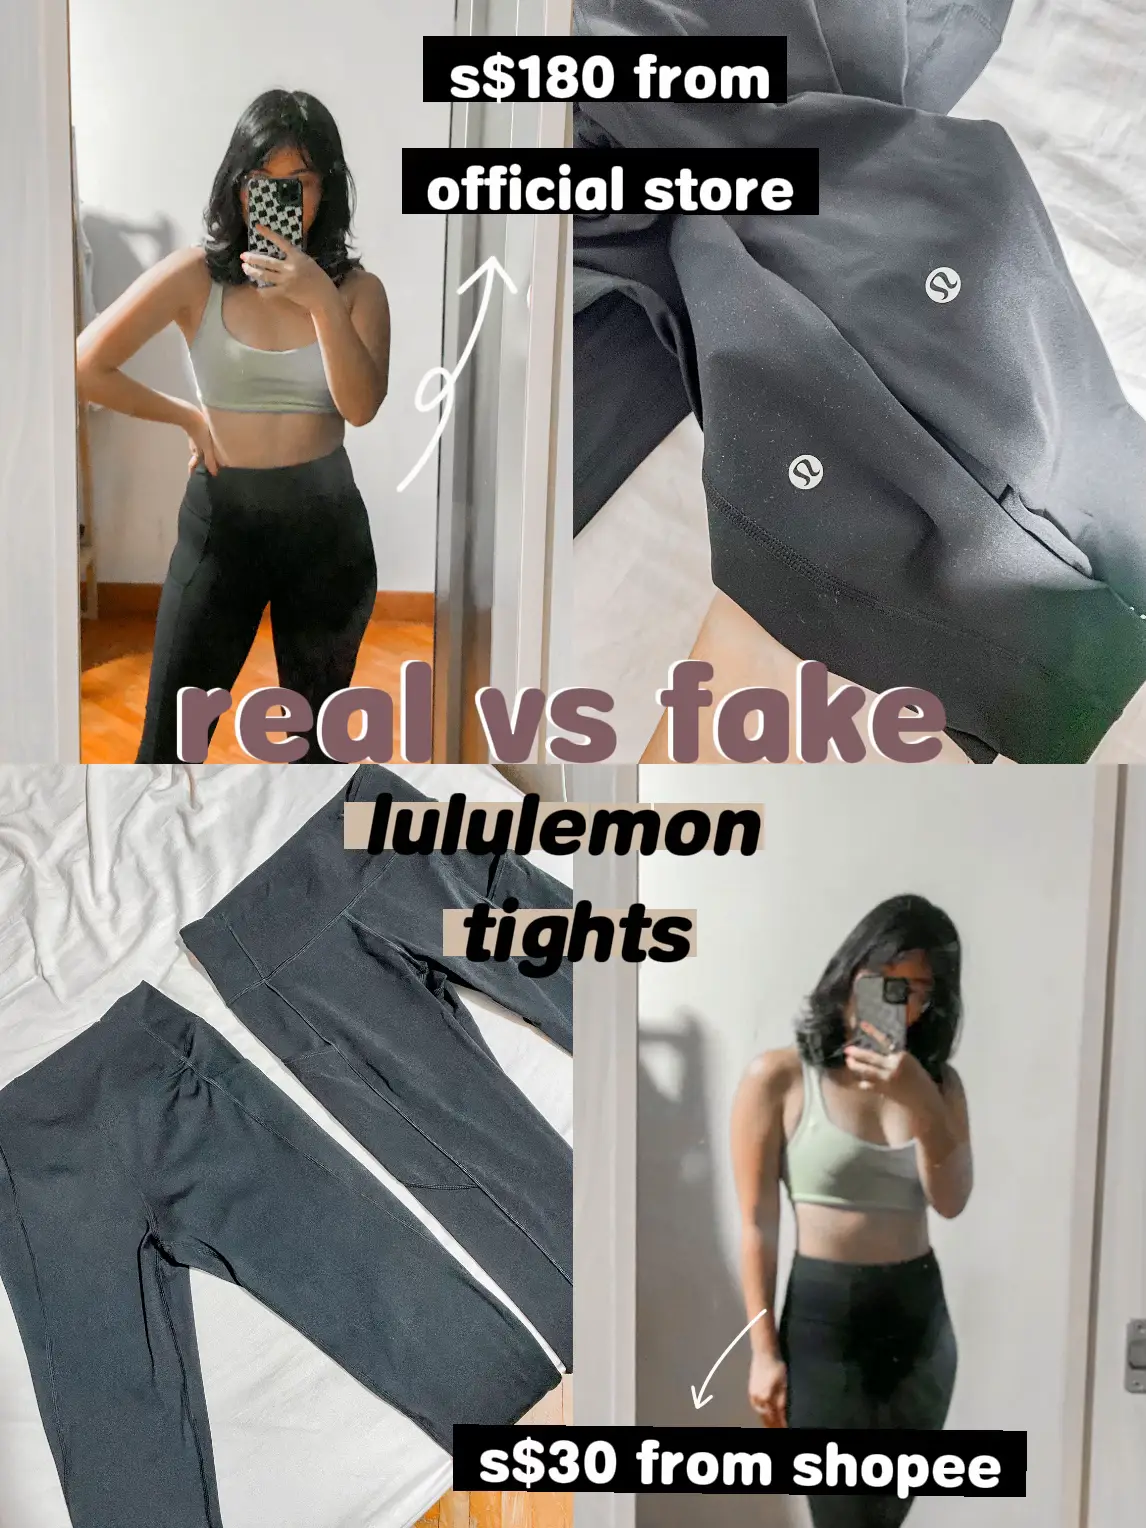 Shopee Finds, Lululemon dupe?!, Video published by Yuqing